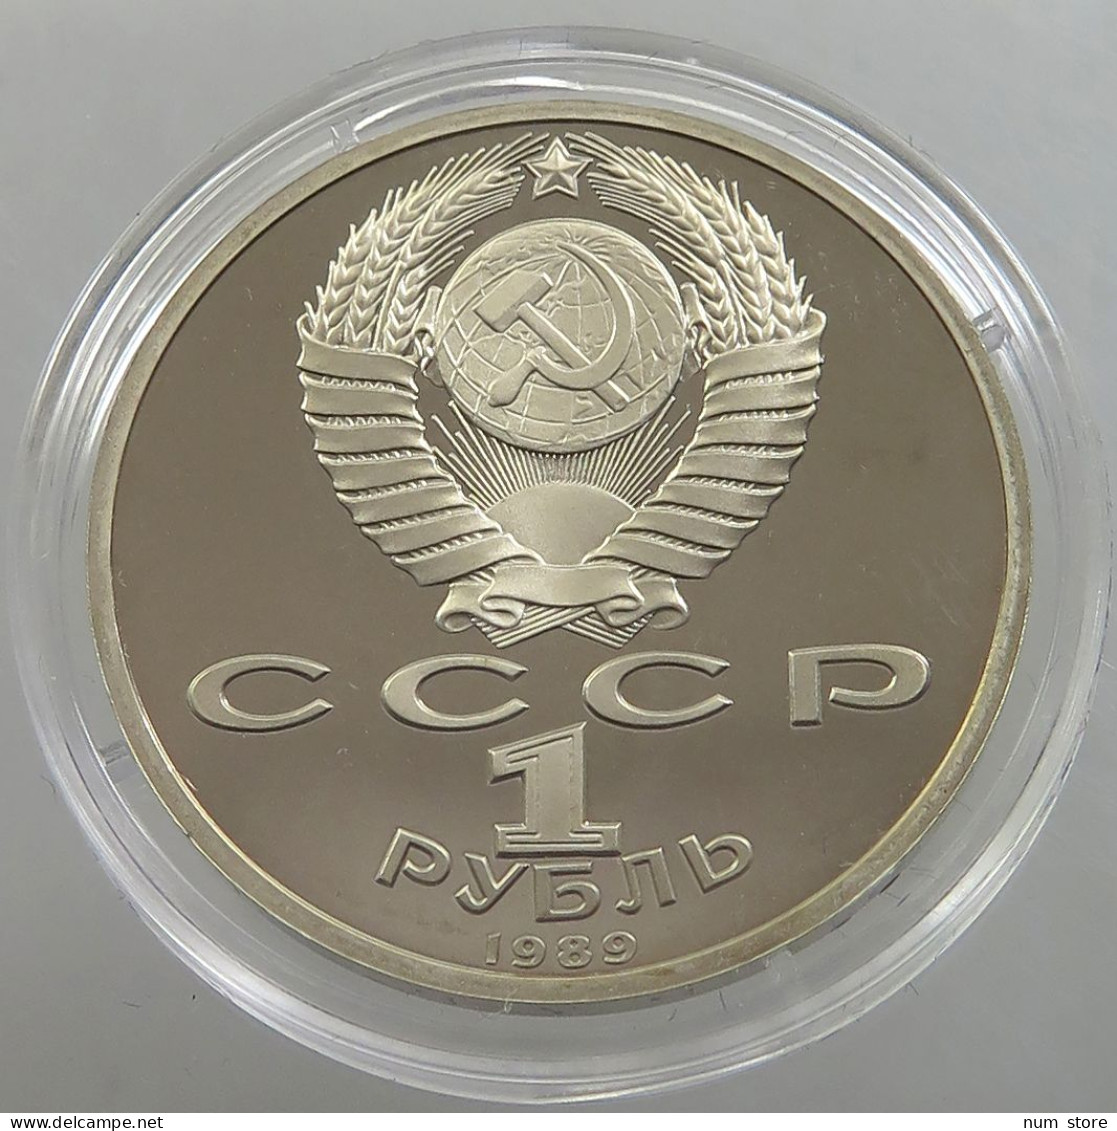 RUSSIA USSR ROUBLE 1989 LERMONTOV PROOF #sm14 0565 - Russia